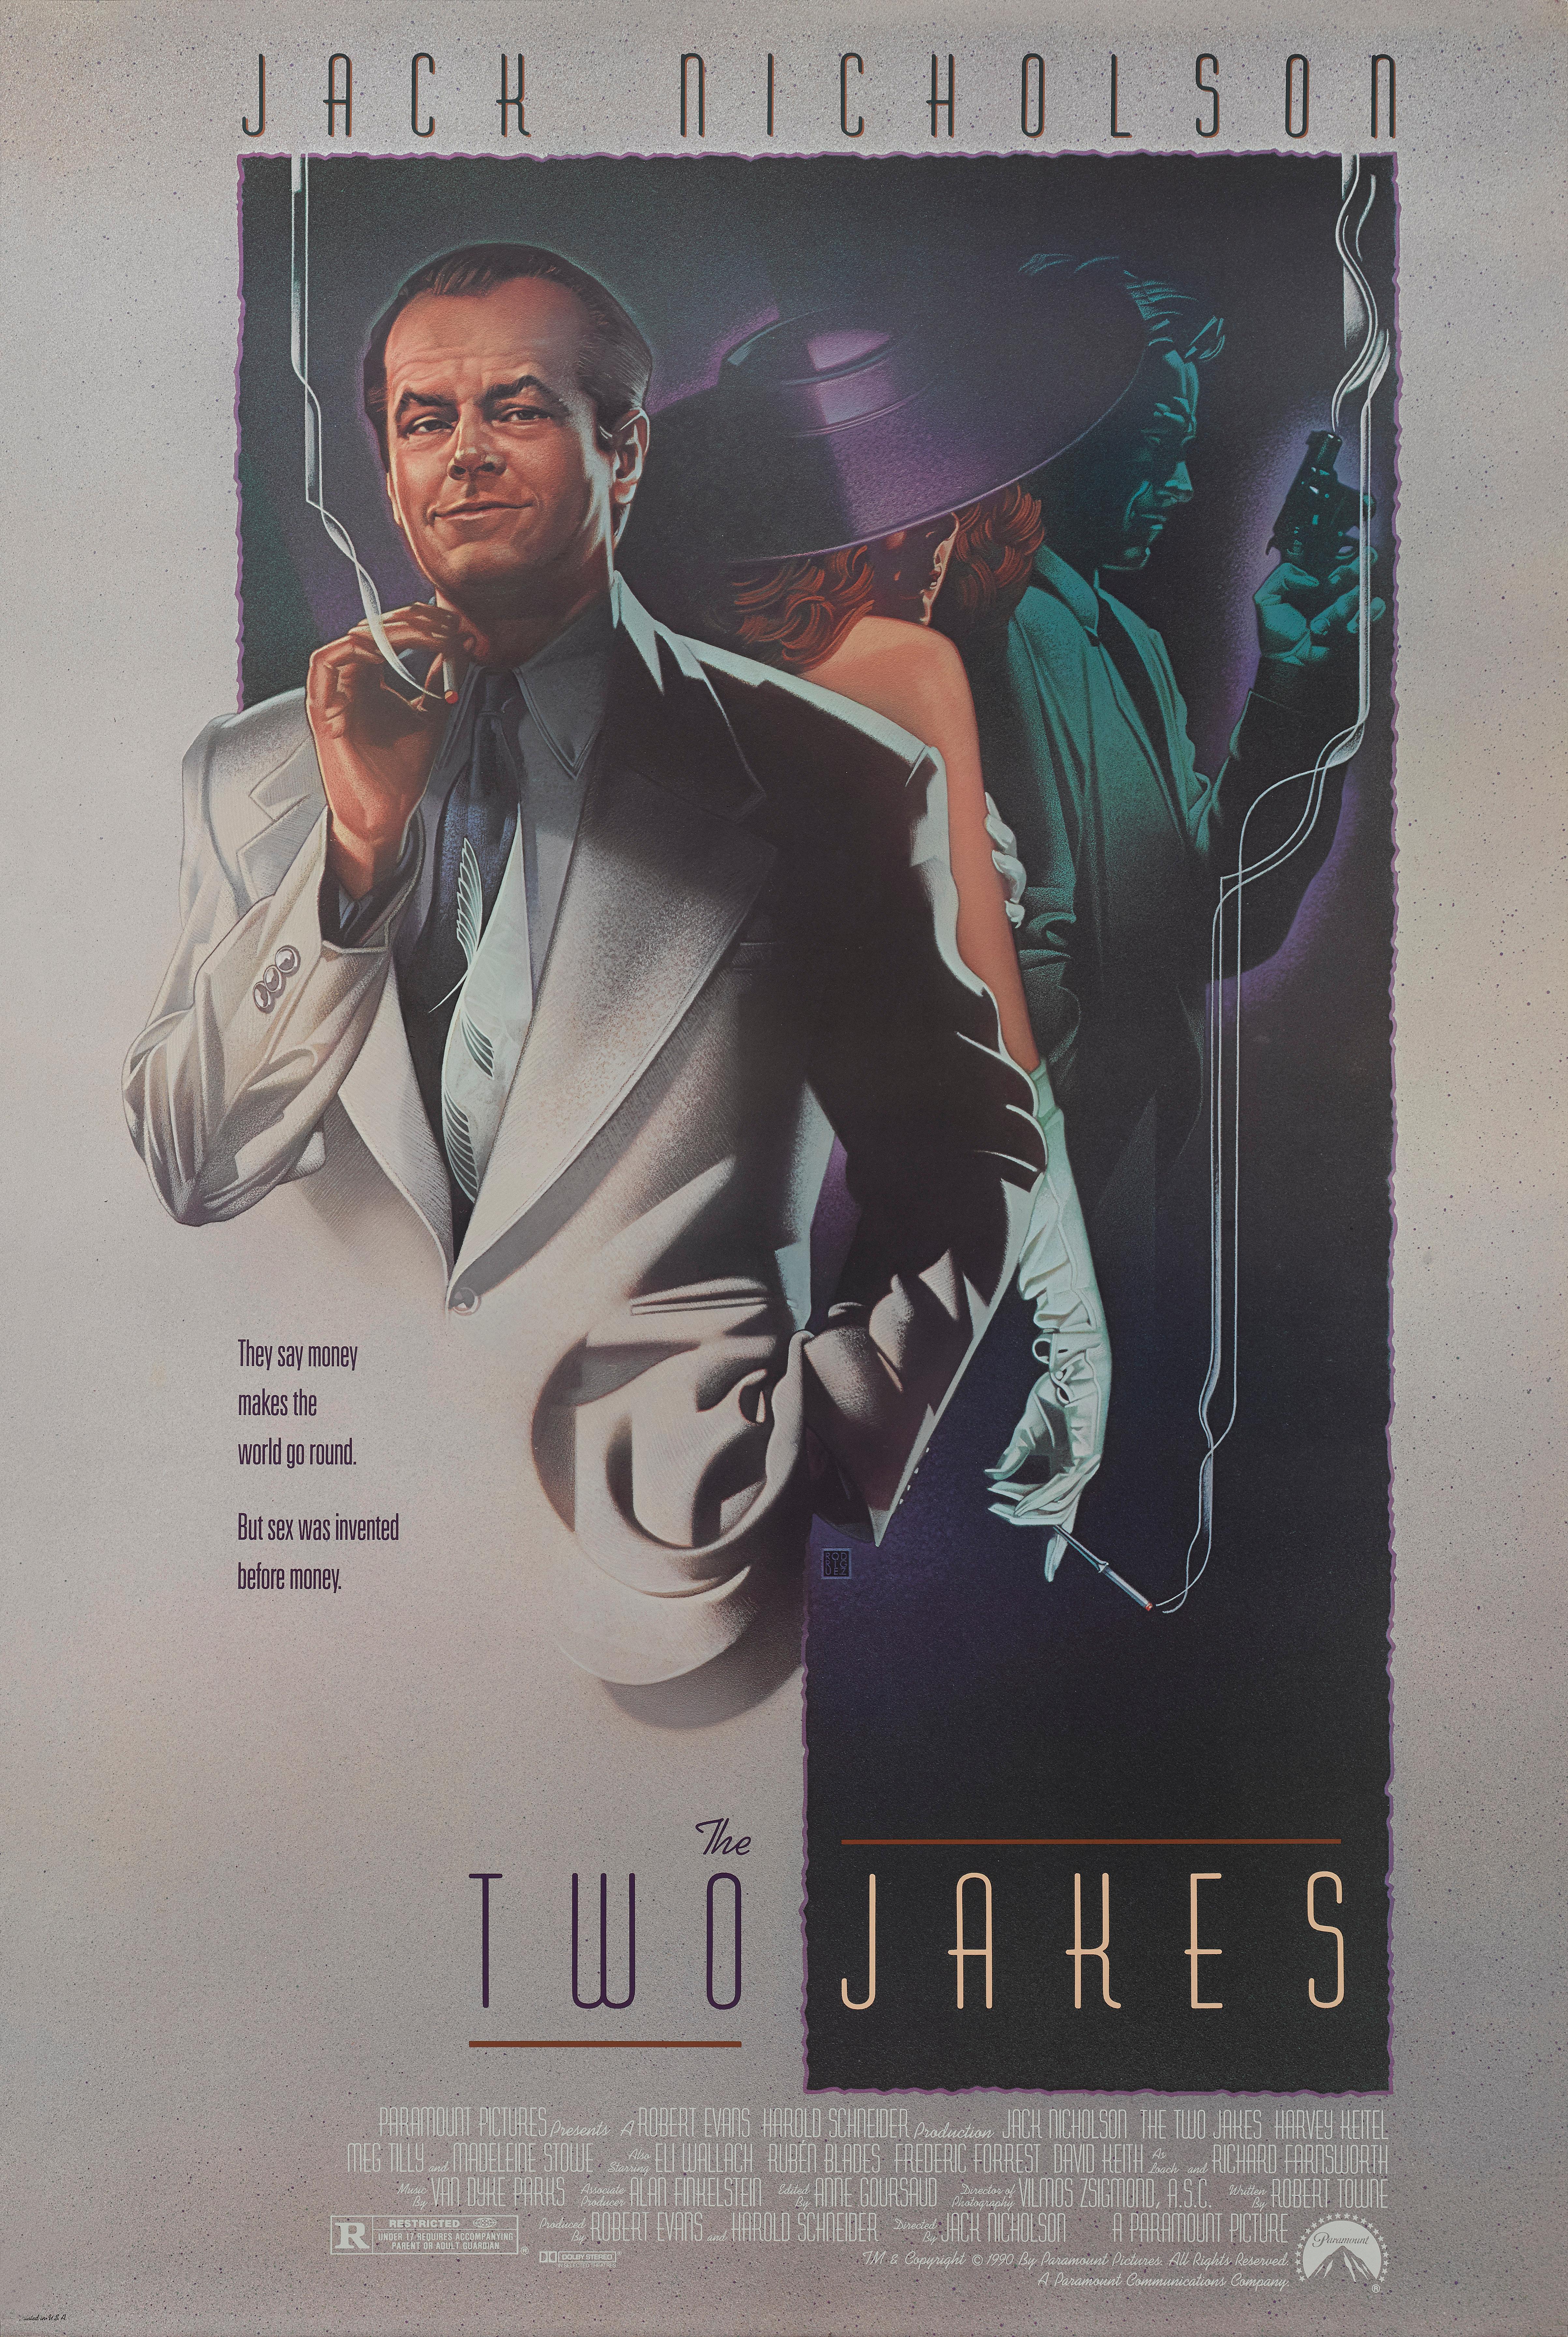 Original US film poster for The Two Jakes this crime drama was directed by Jack Nicholson. He also starred in the film along side Harvey Keitel and Meg Tilly.
This poster is unfolded and in near mint condition.
It would be shipped rolled in a very